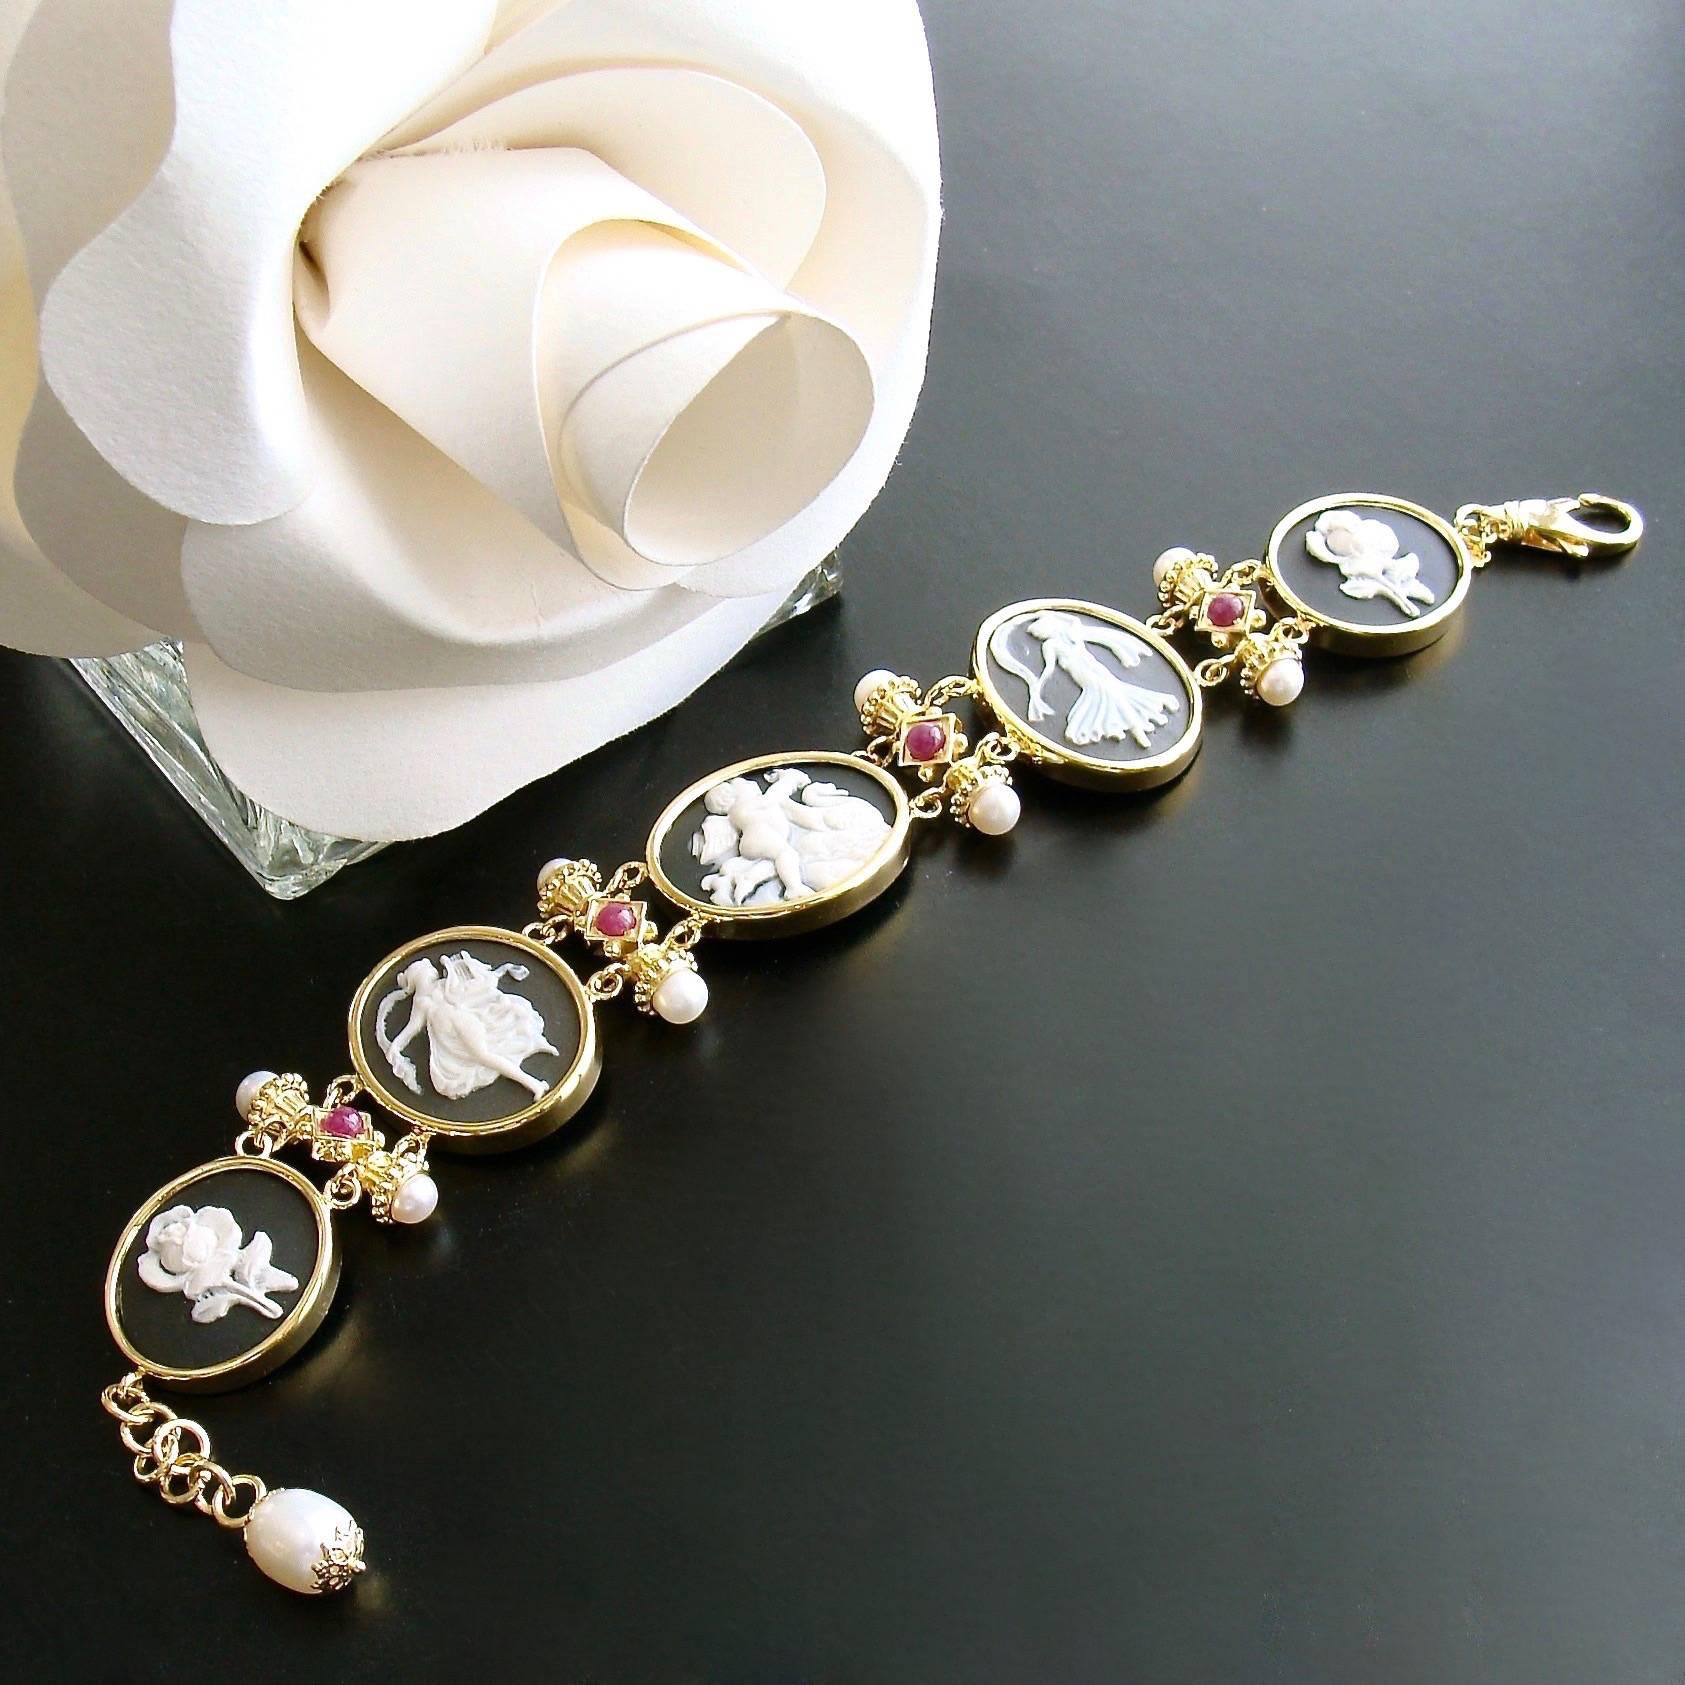 Neoclassical Rubies Freshwater Pearls Black White Cameo Intaglio Yellow Gold Bracelet